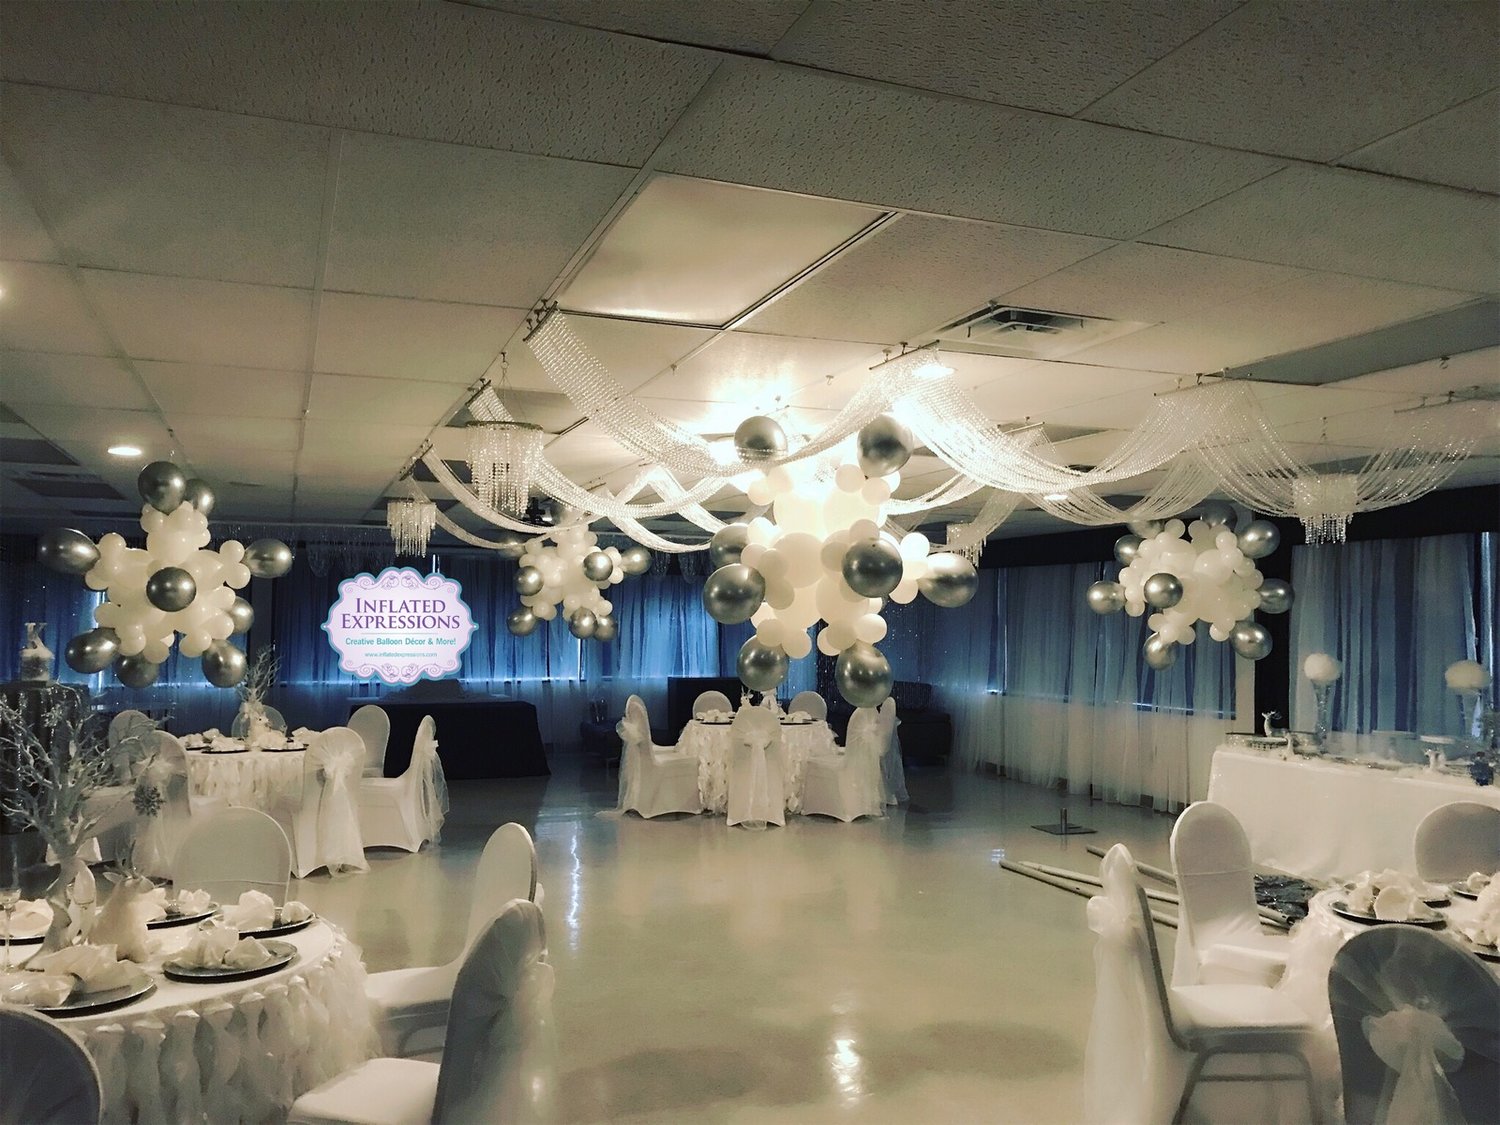 Ceiling balloon snowflake — Inflated Expressions, LLC